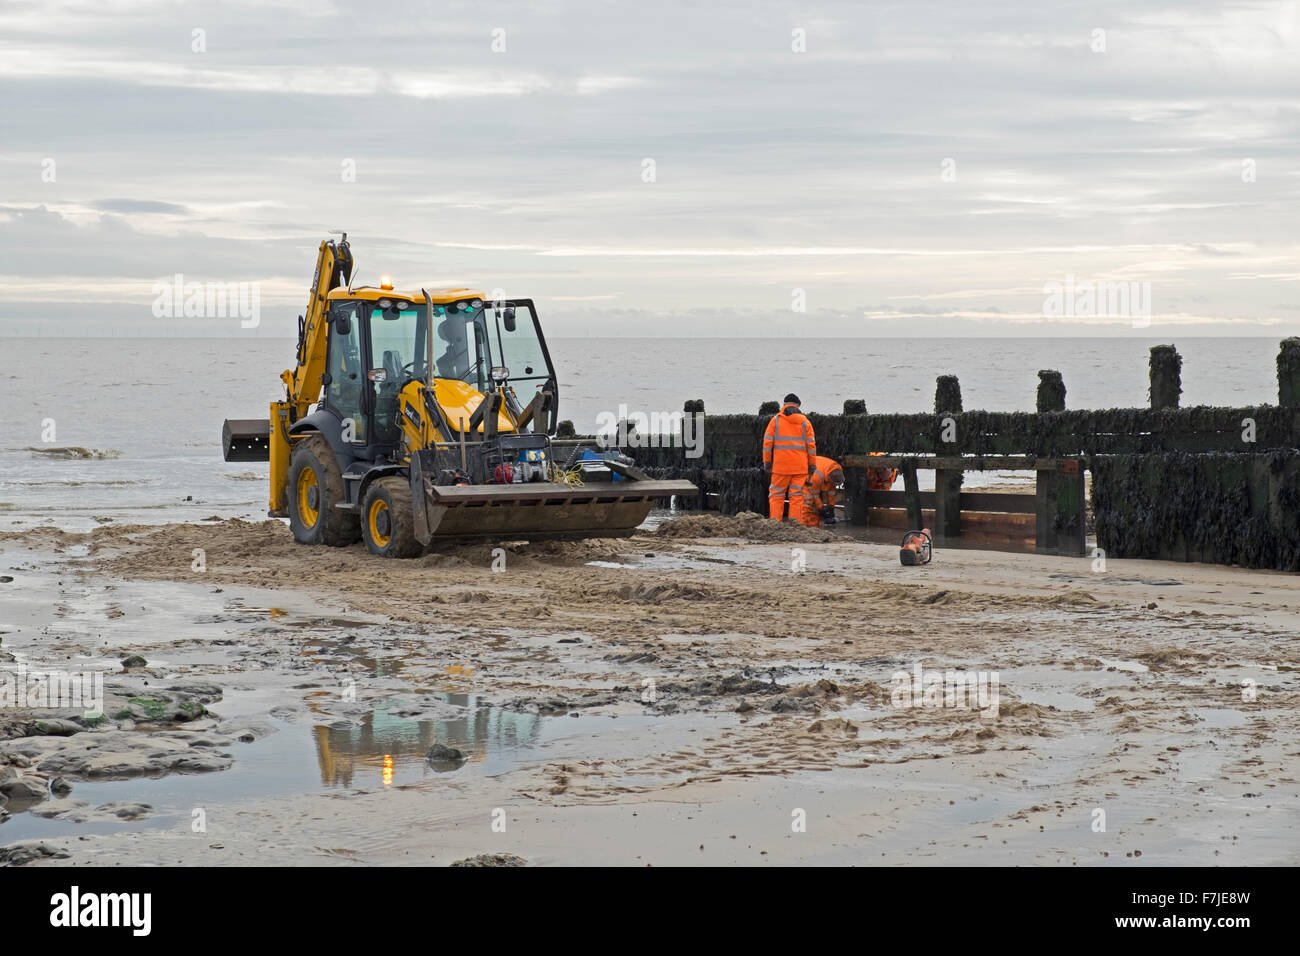 repairing wooden groyne beach walton naze essex, groynes are sturdy barriers built out into the sea from a beach to check erosion and drifting. Stock Photo